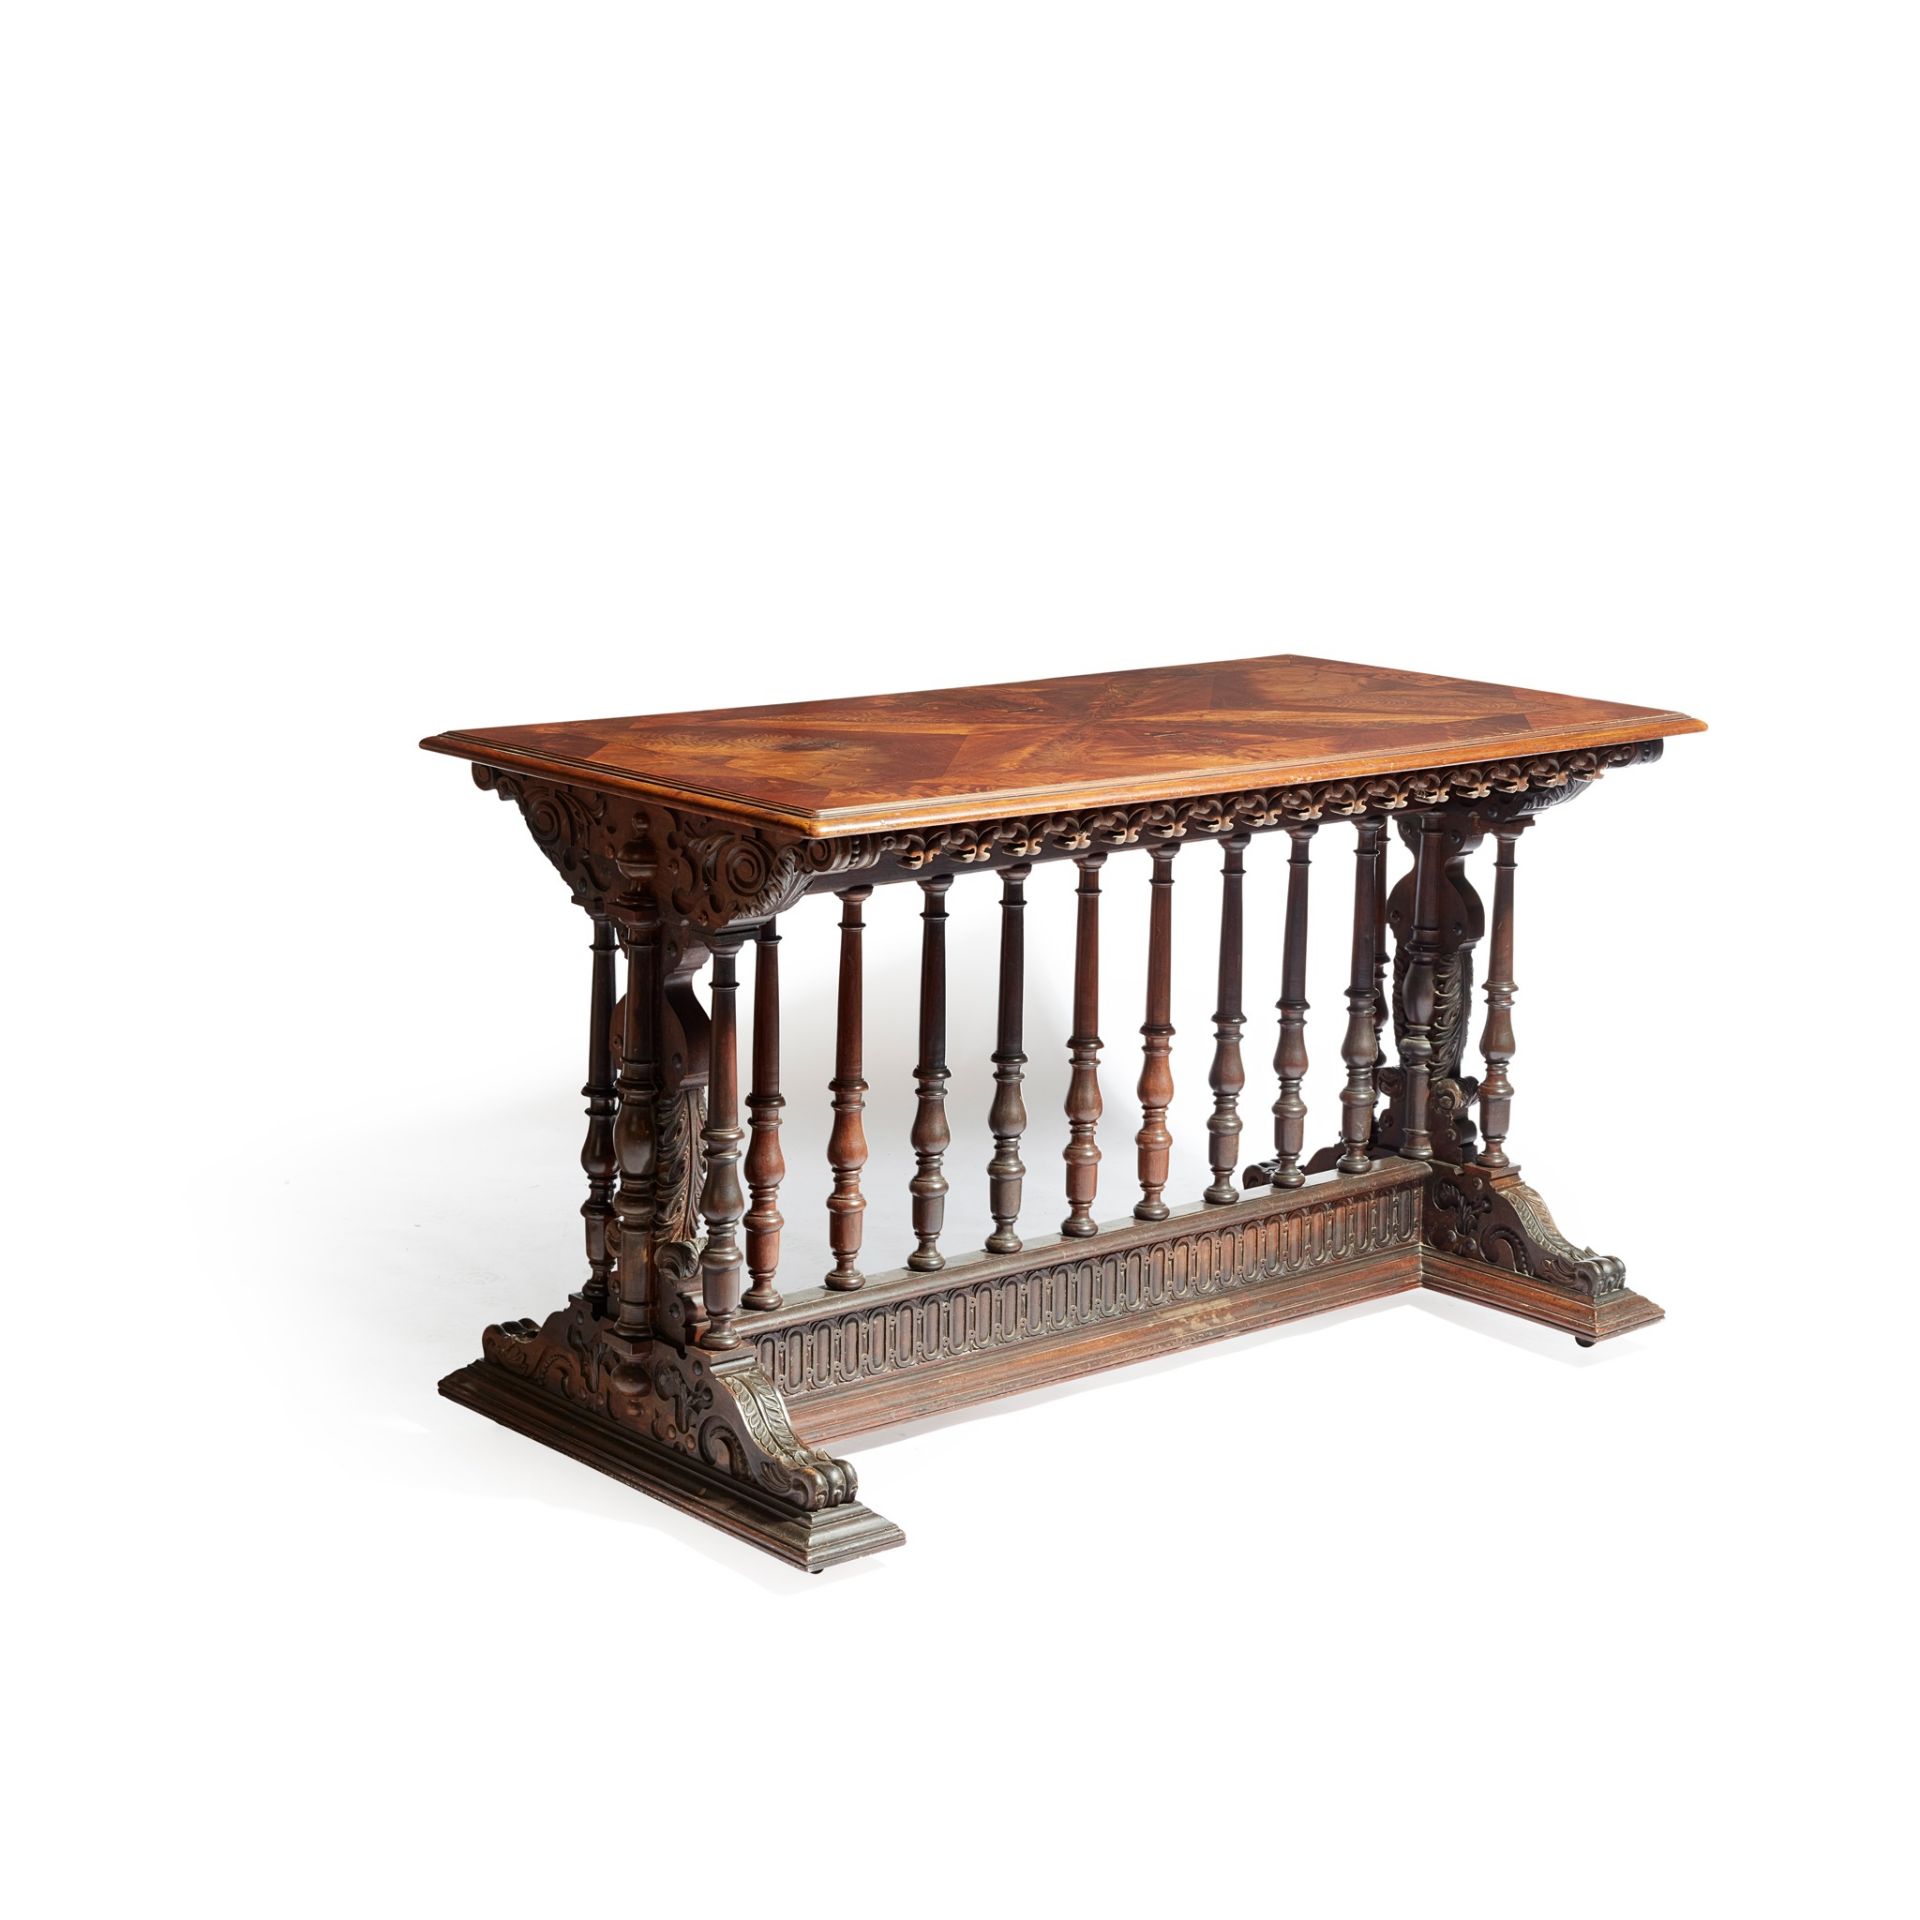 LATE GOTHIC STYLE MAHOGANY AND MARQUETRY LIBRARY TABLE MID 19TH CENTURY - Image 2 of 3